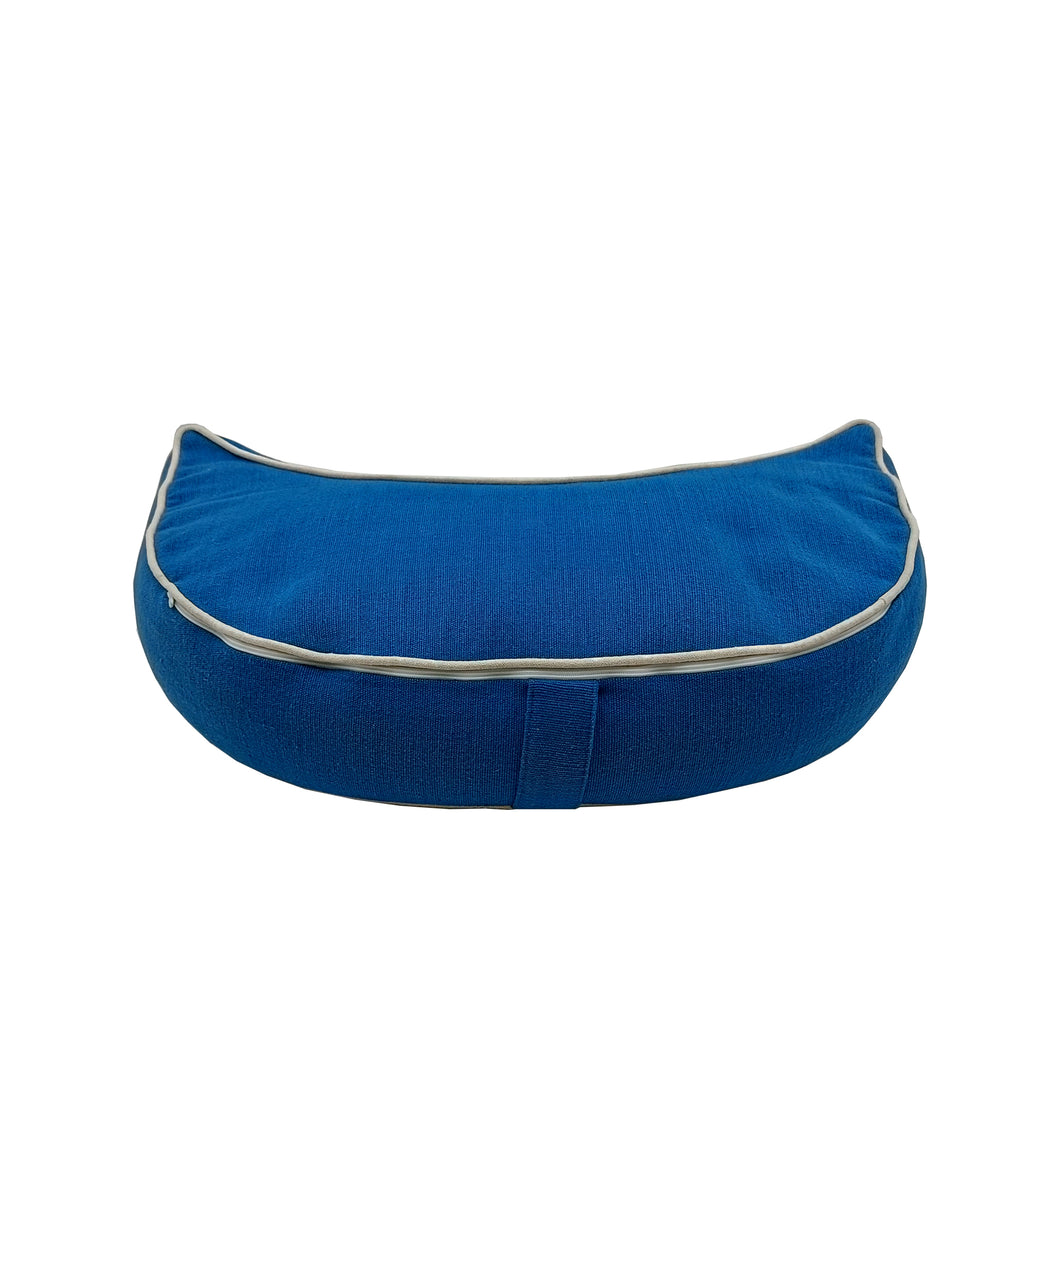 Meditation Cushion Crescent Shaped Zafu Filled With Buckwheat Hulls - Solid Blue Crescent Cushion with Piping